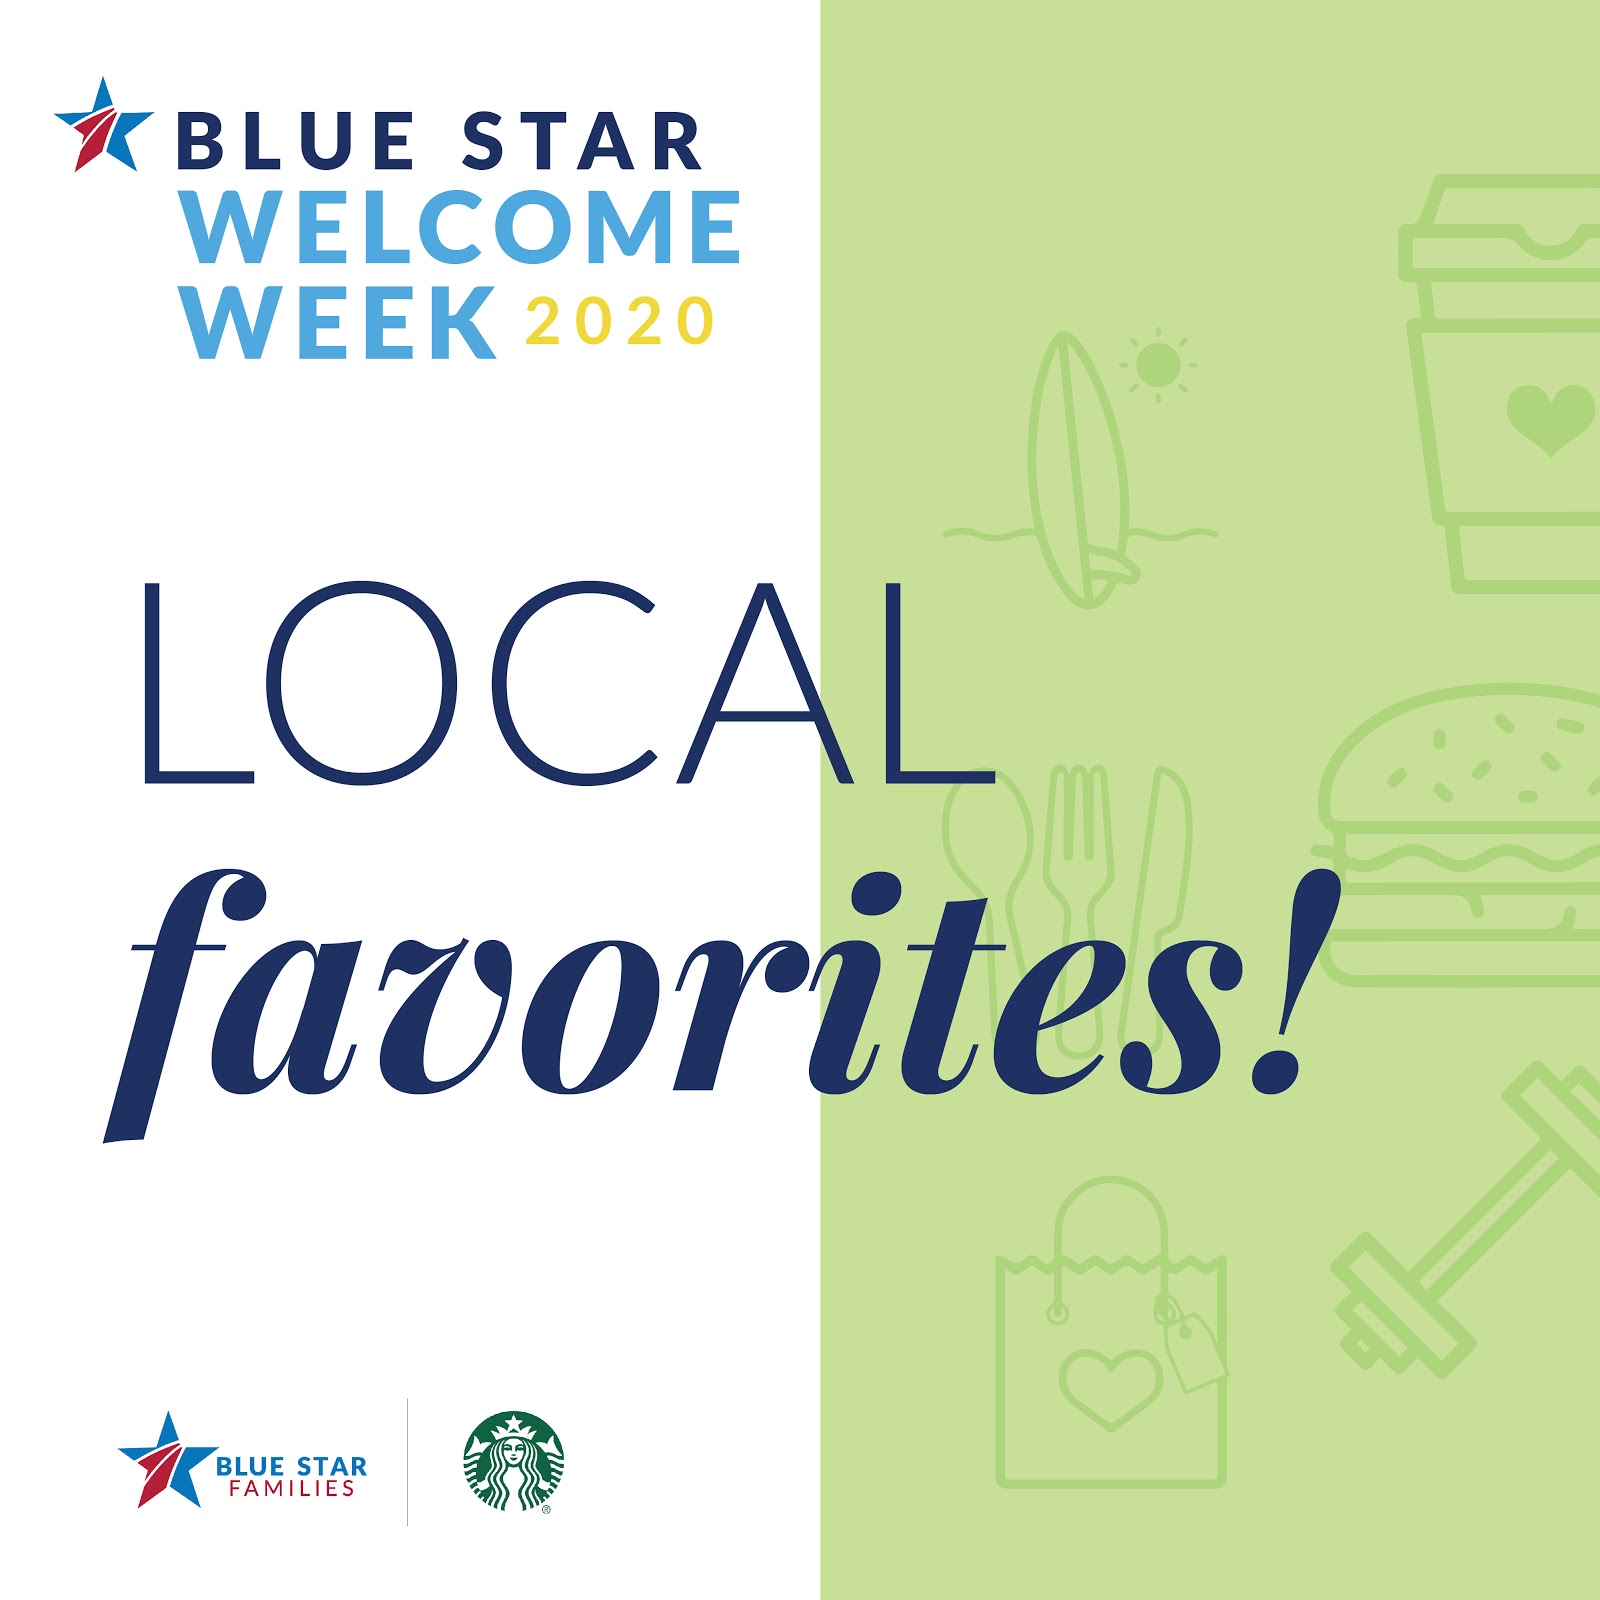 Share your local favorites